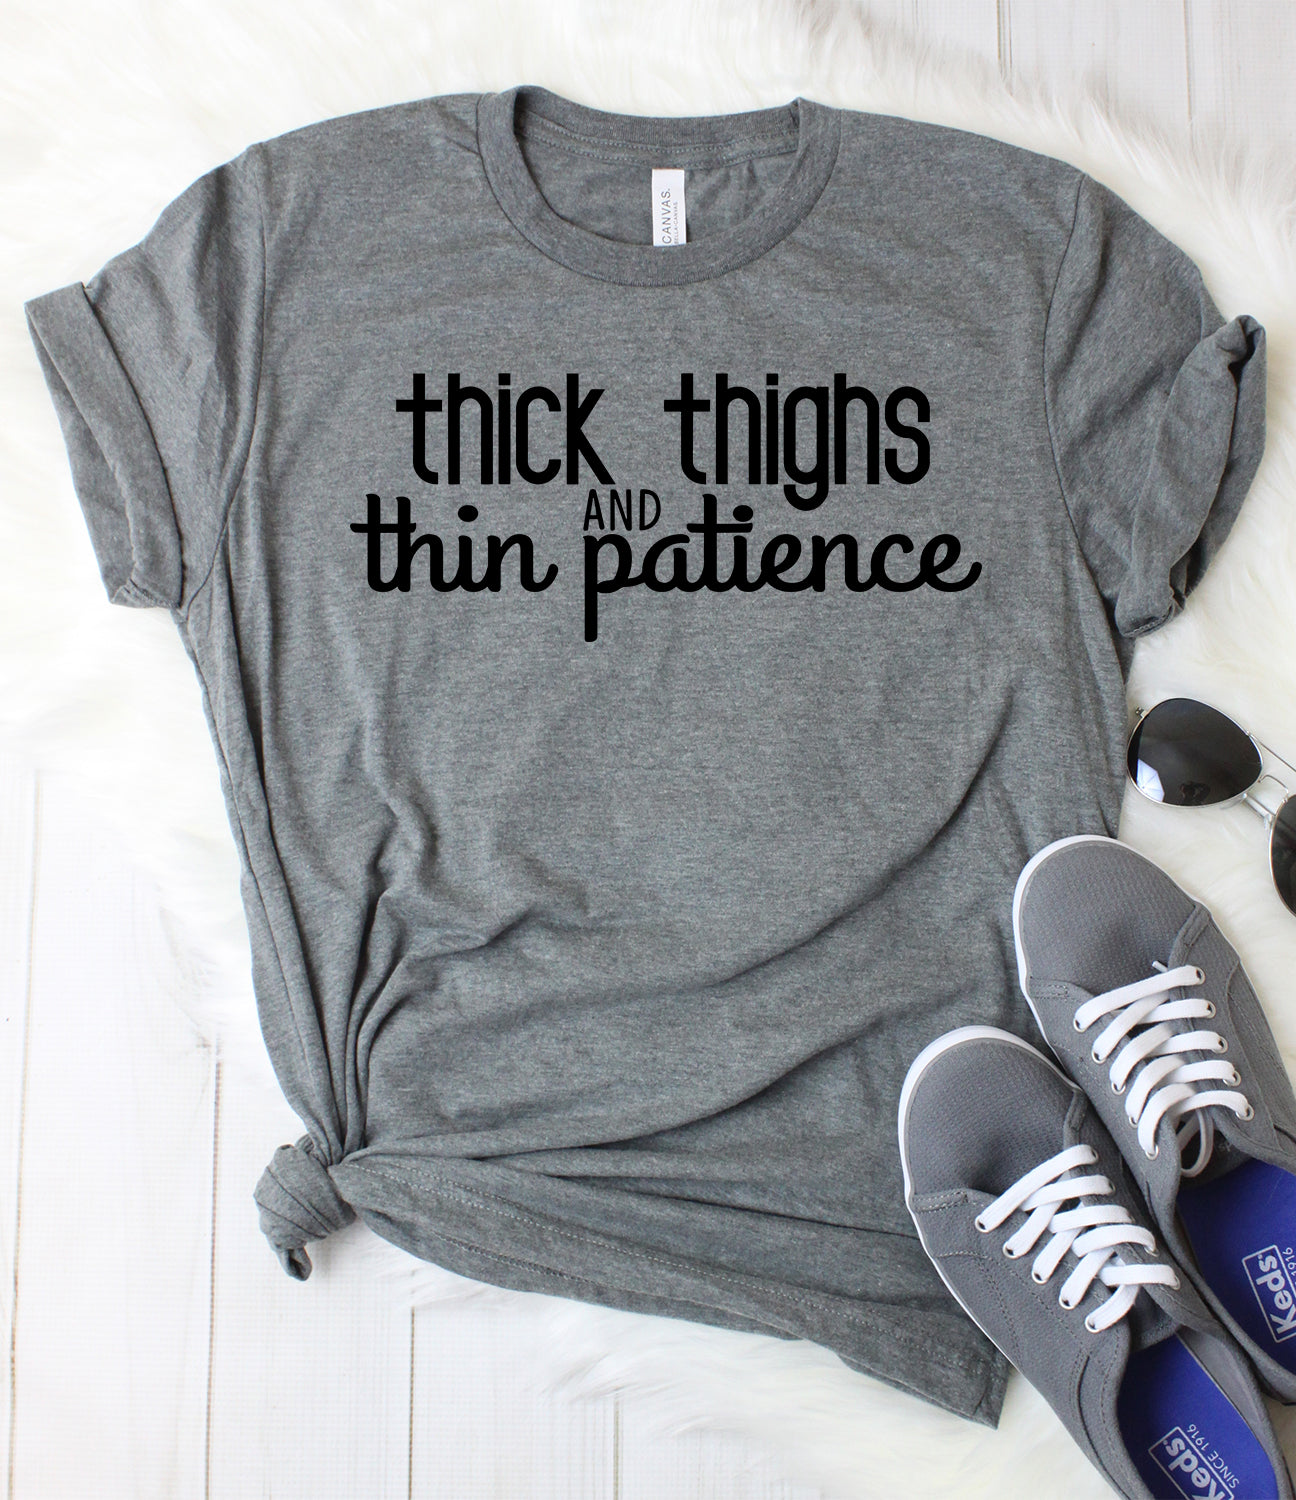 Thick Thighs Thin Patience T-shirt, Sarcastic Shirt, Women's